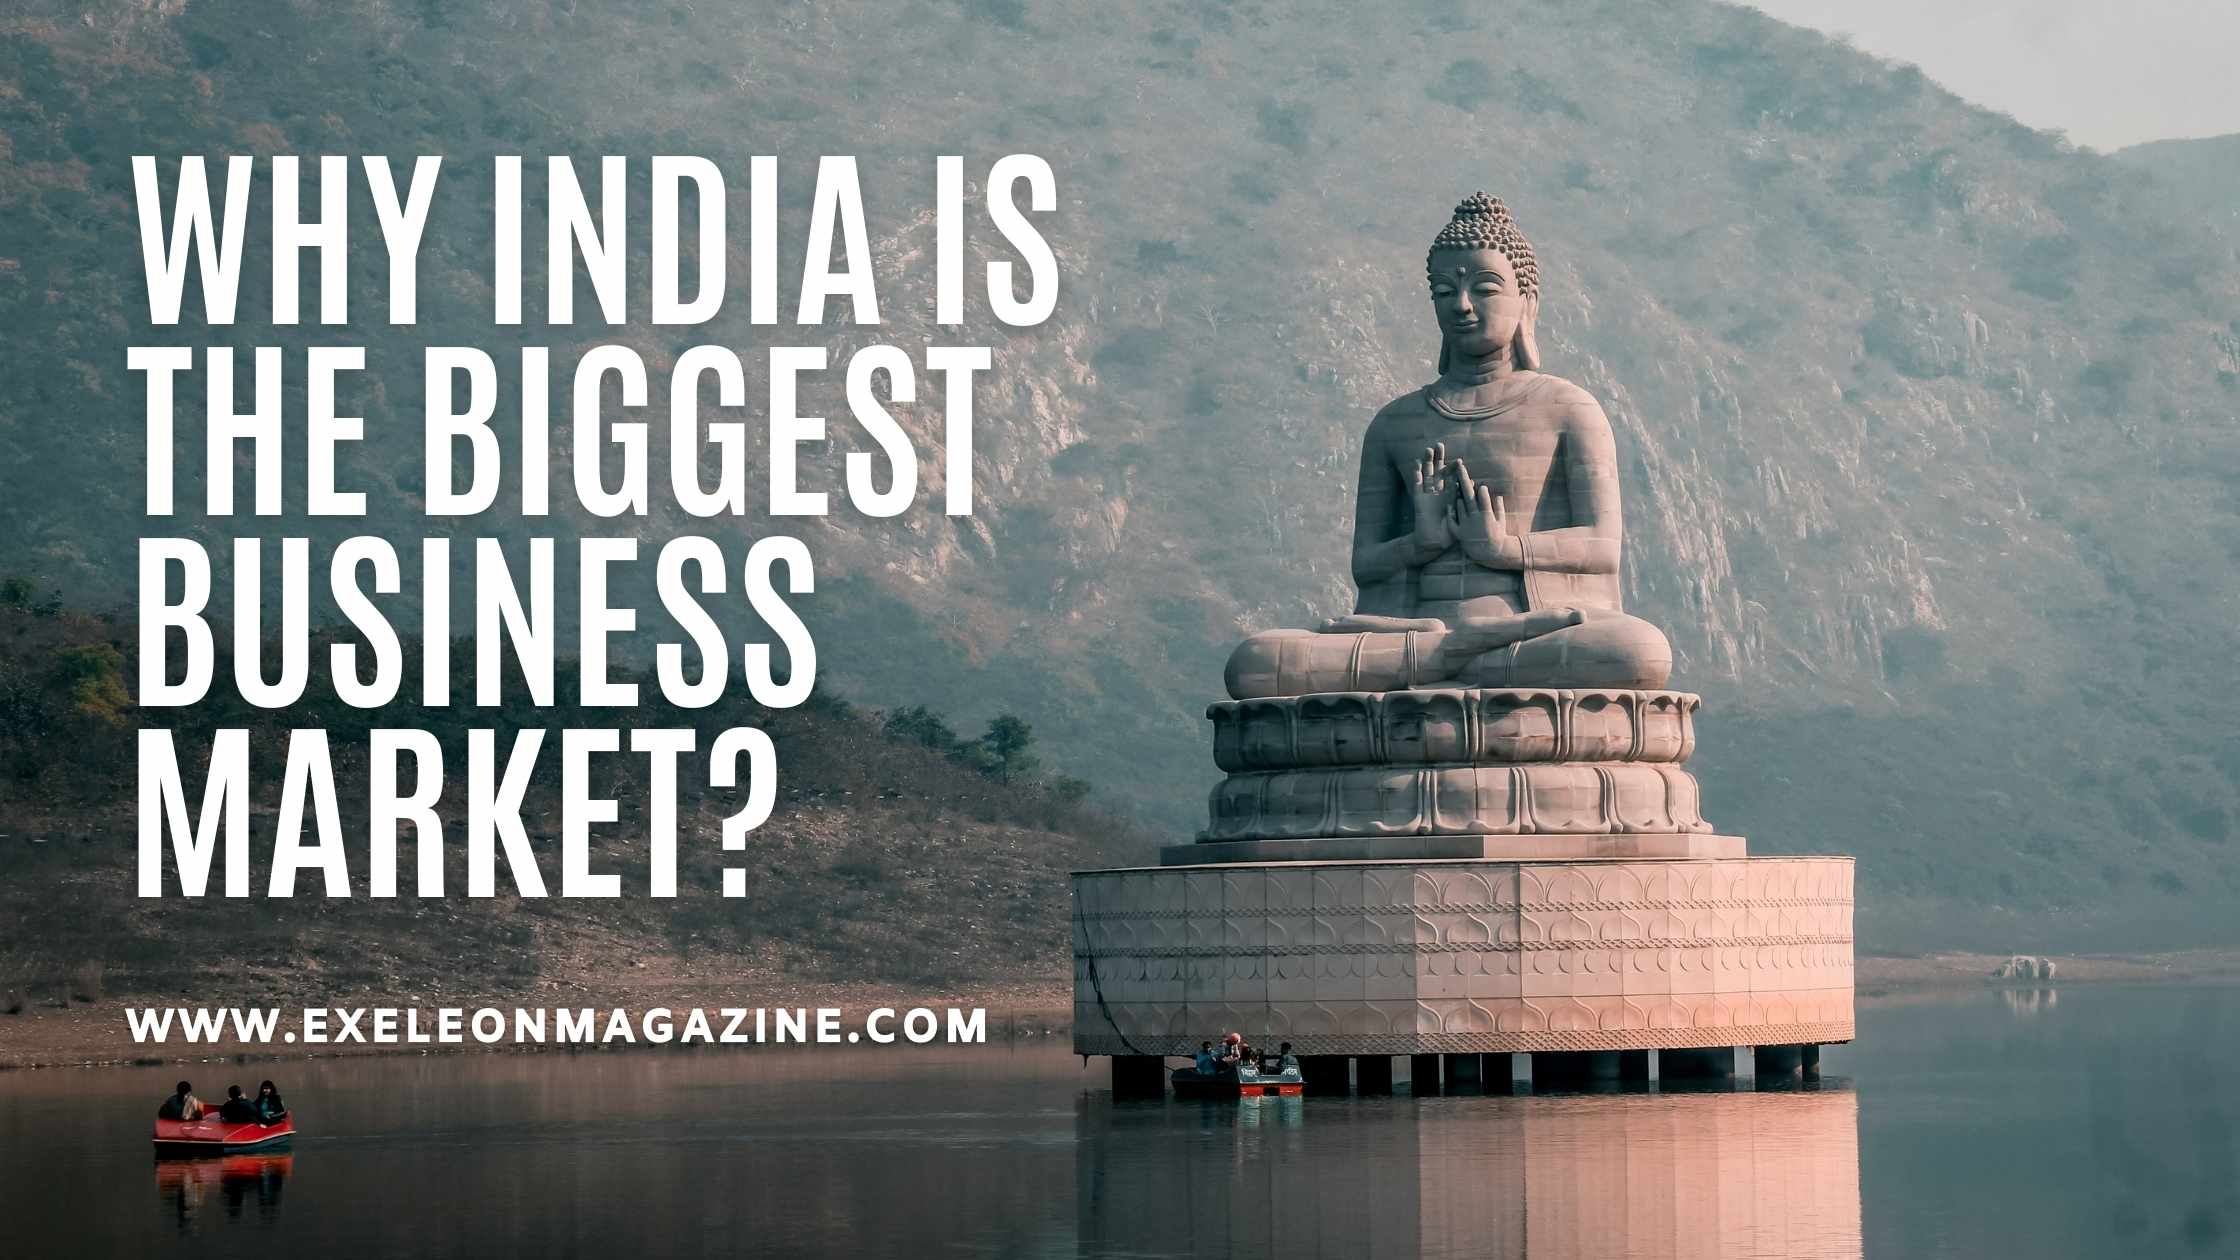 Why India is the Biggest Business Market?